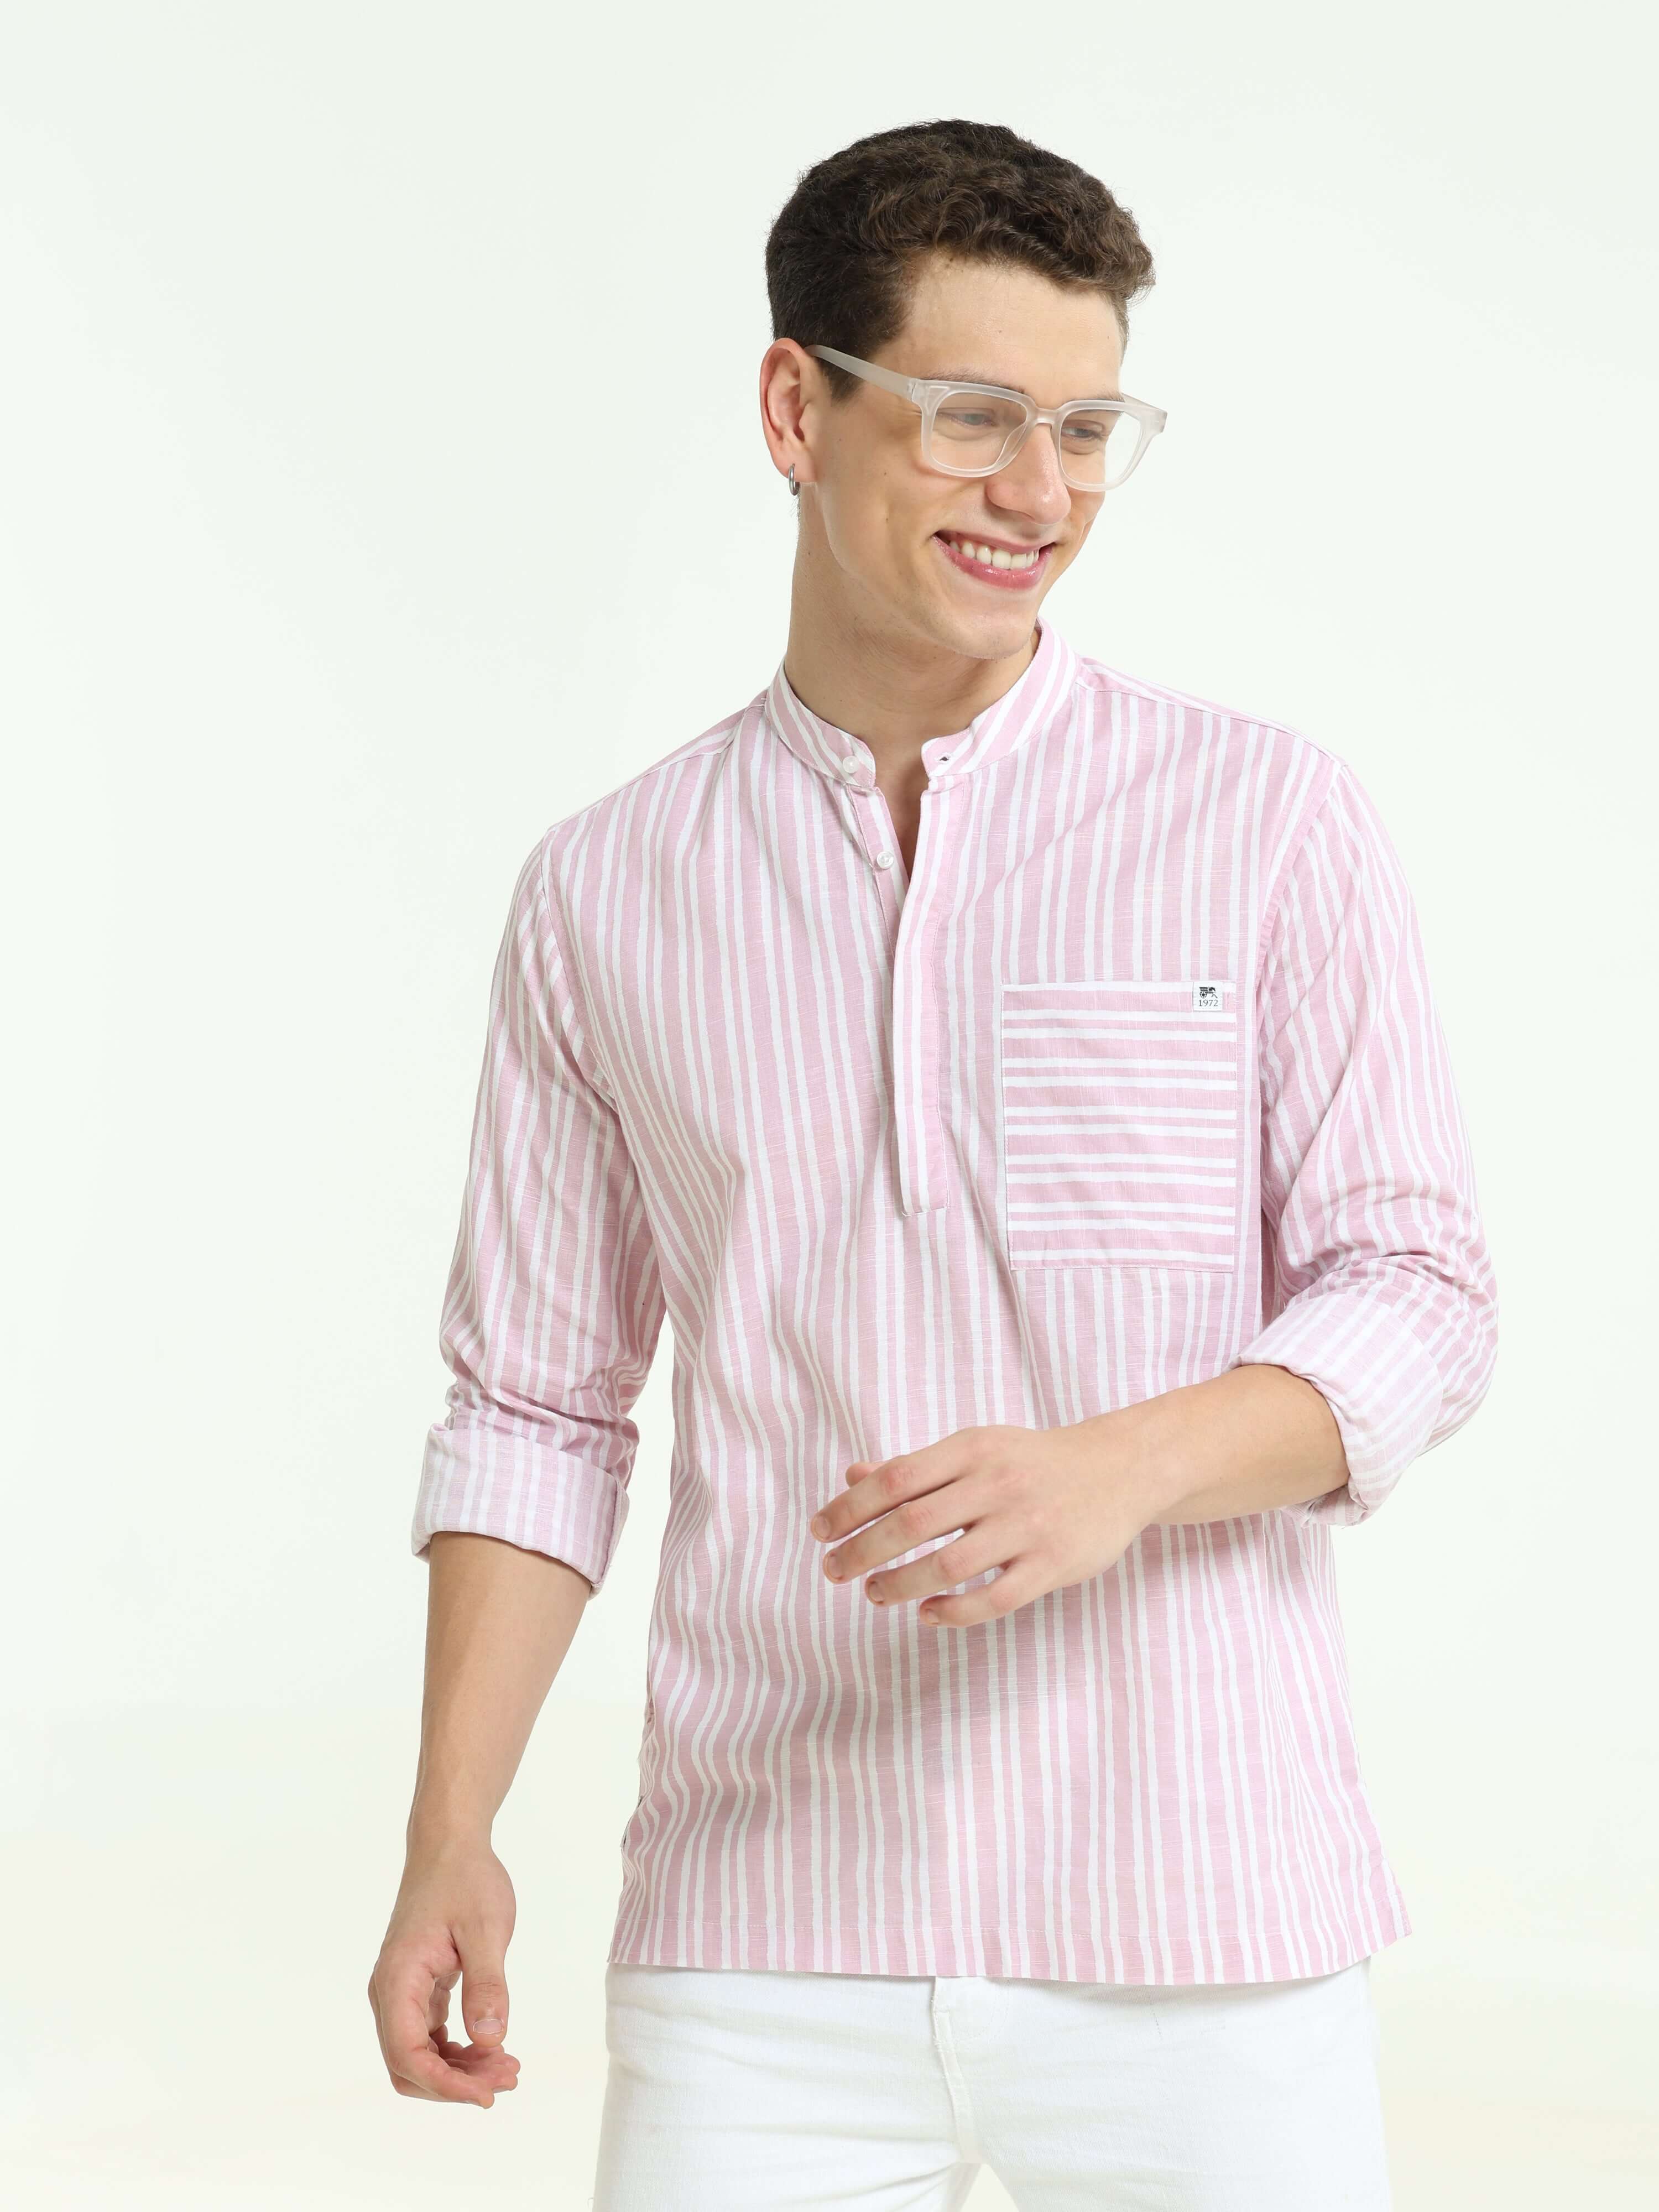 Throne pastel pink casual kurta shop online at Estilocus. • Five-sleeve stripe kurta• Mandarin collar• Double button square cuff.• Single pocket with logo embroidery• Curved hemline• All double-needle construction, finest quality sewing• Machine wash care